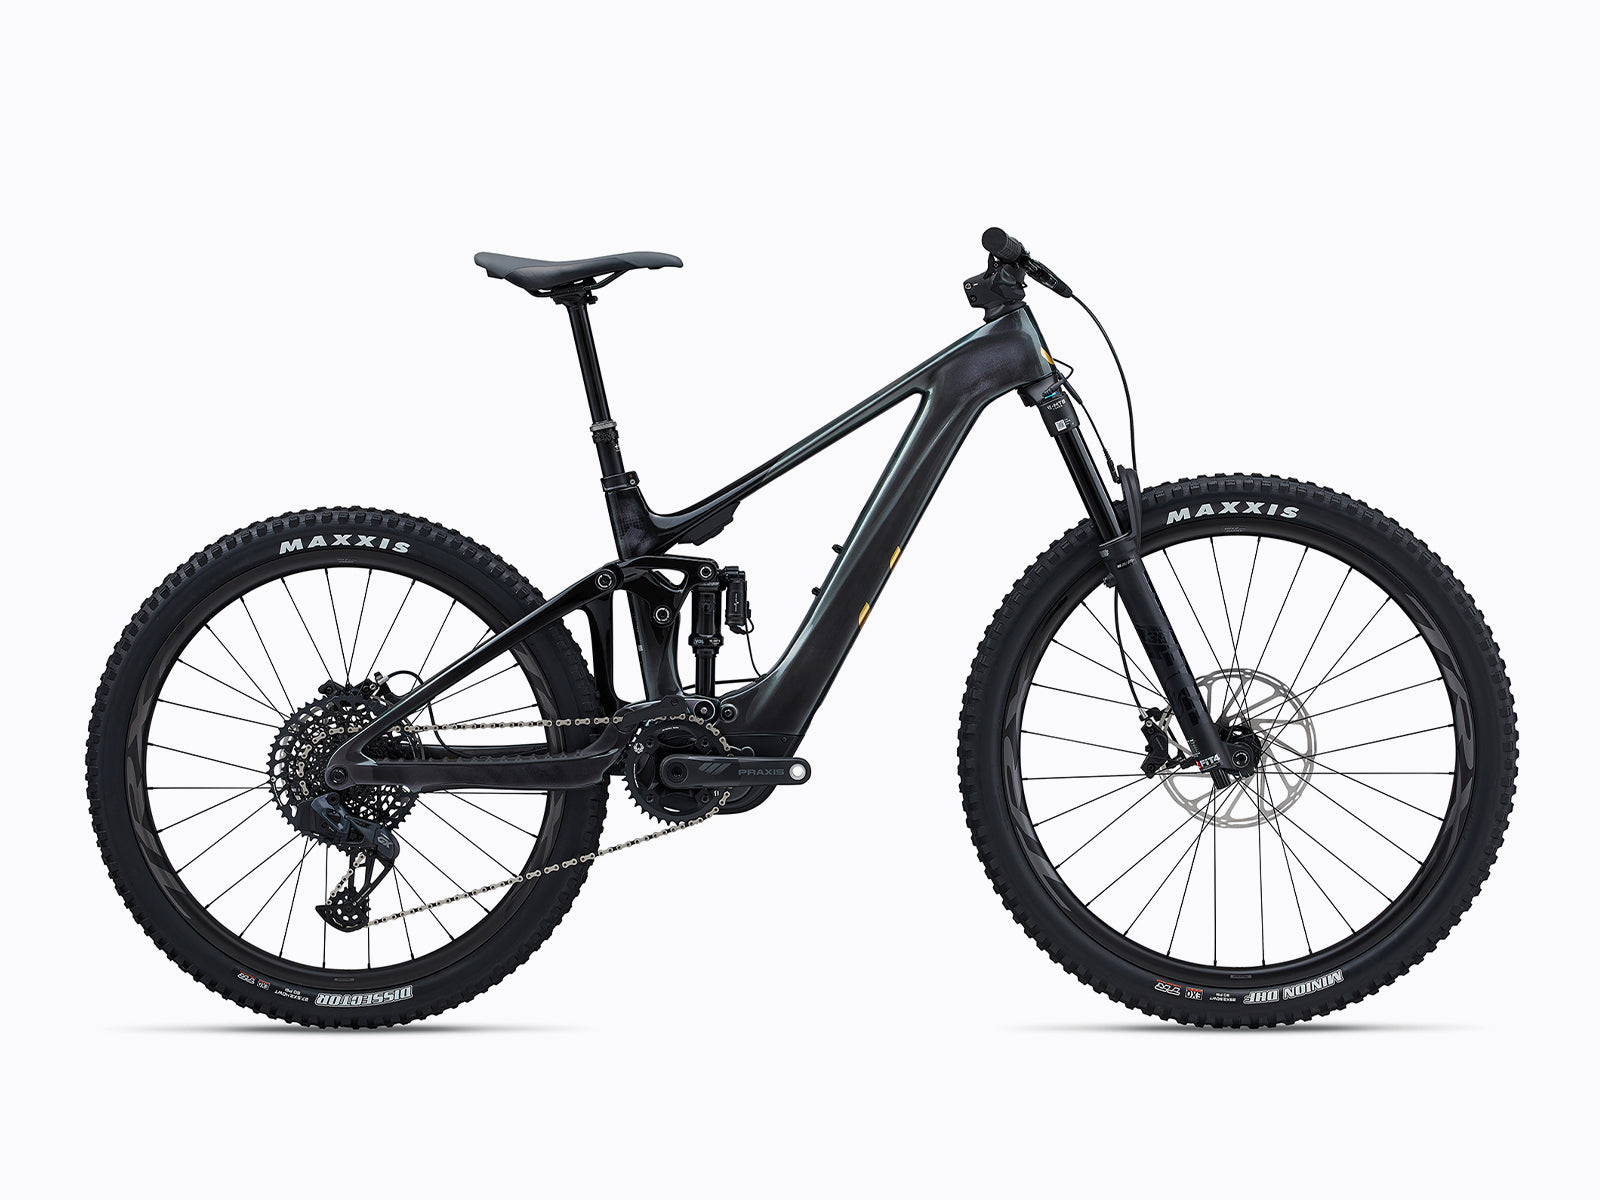 image includes intrigue x advanced e+ elite 1, a ladies mountain bike now sold at Giant Melbourne 